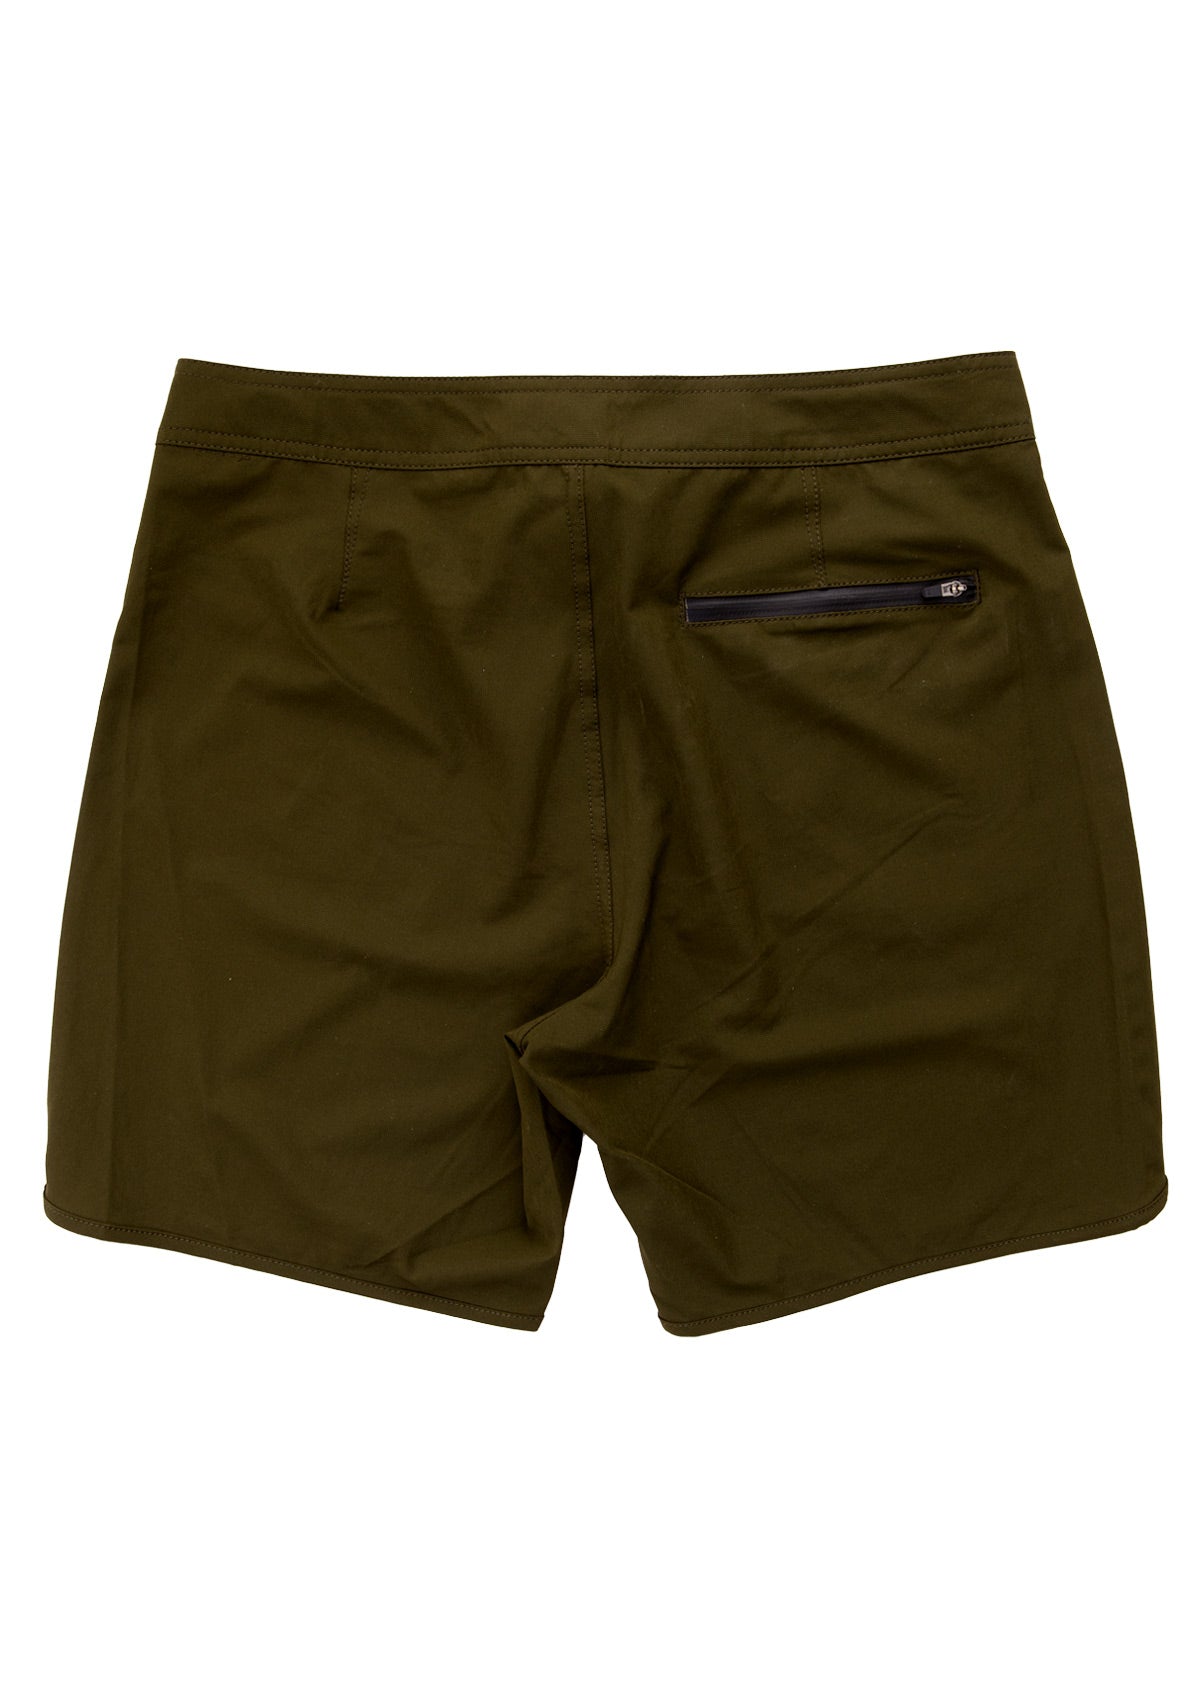 needessentials scallop mens surfing boardshorts non branded olive swimming